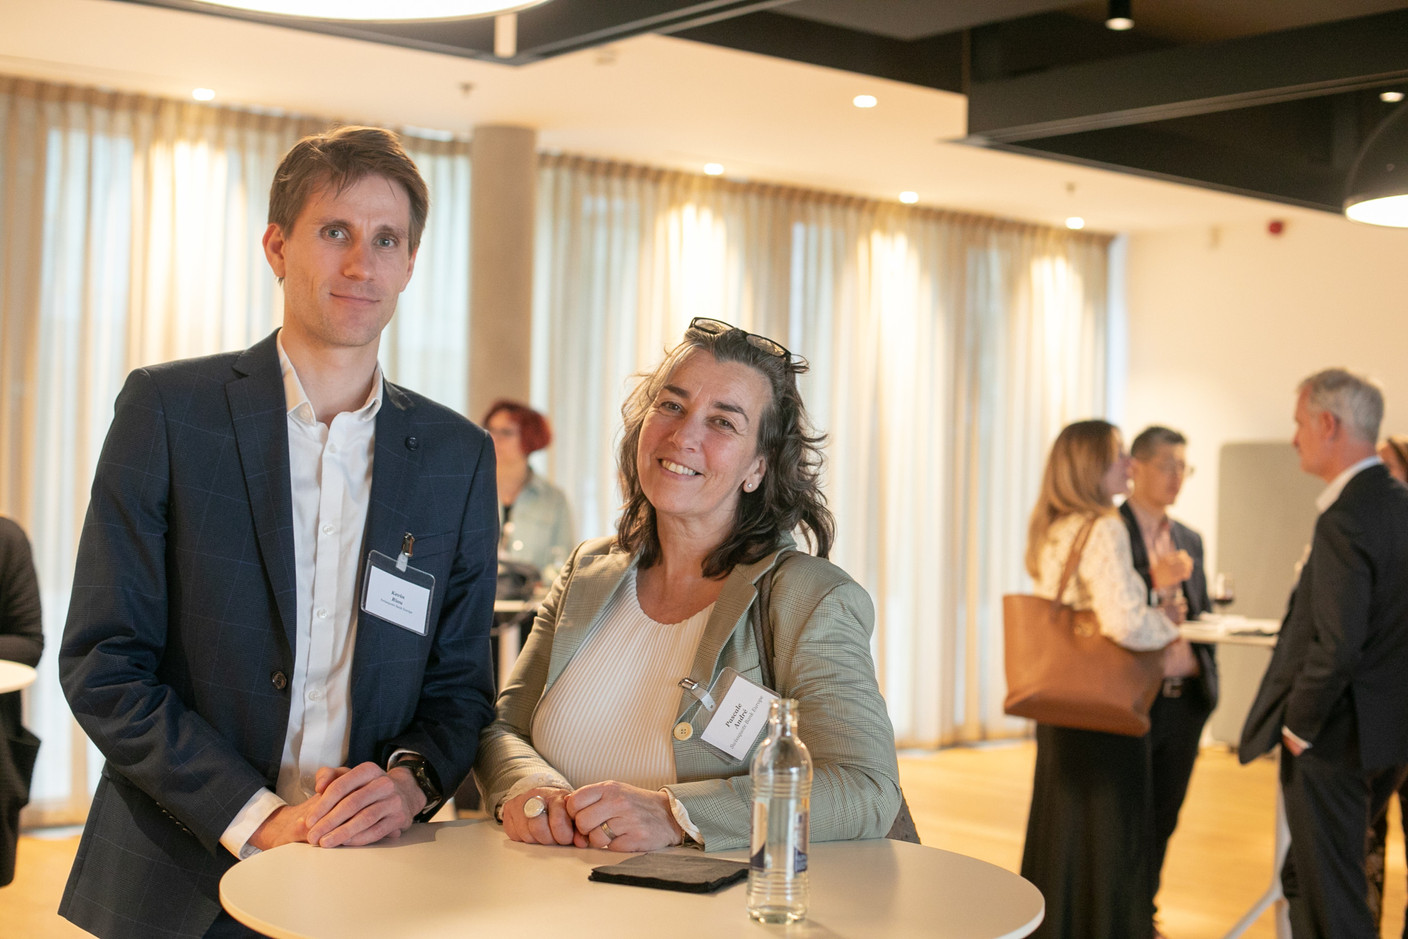 Kevin Riou (Swissquote Bank Europe), Pascale Andre (Swissquote Bank Europe) at the 2023 Cryptoassets Management Conference, hosted by PwC Luxembourg on 4 May 2023. Photo: Matic Zorman / Maison Moderne